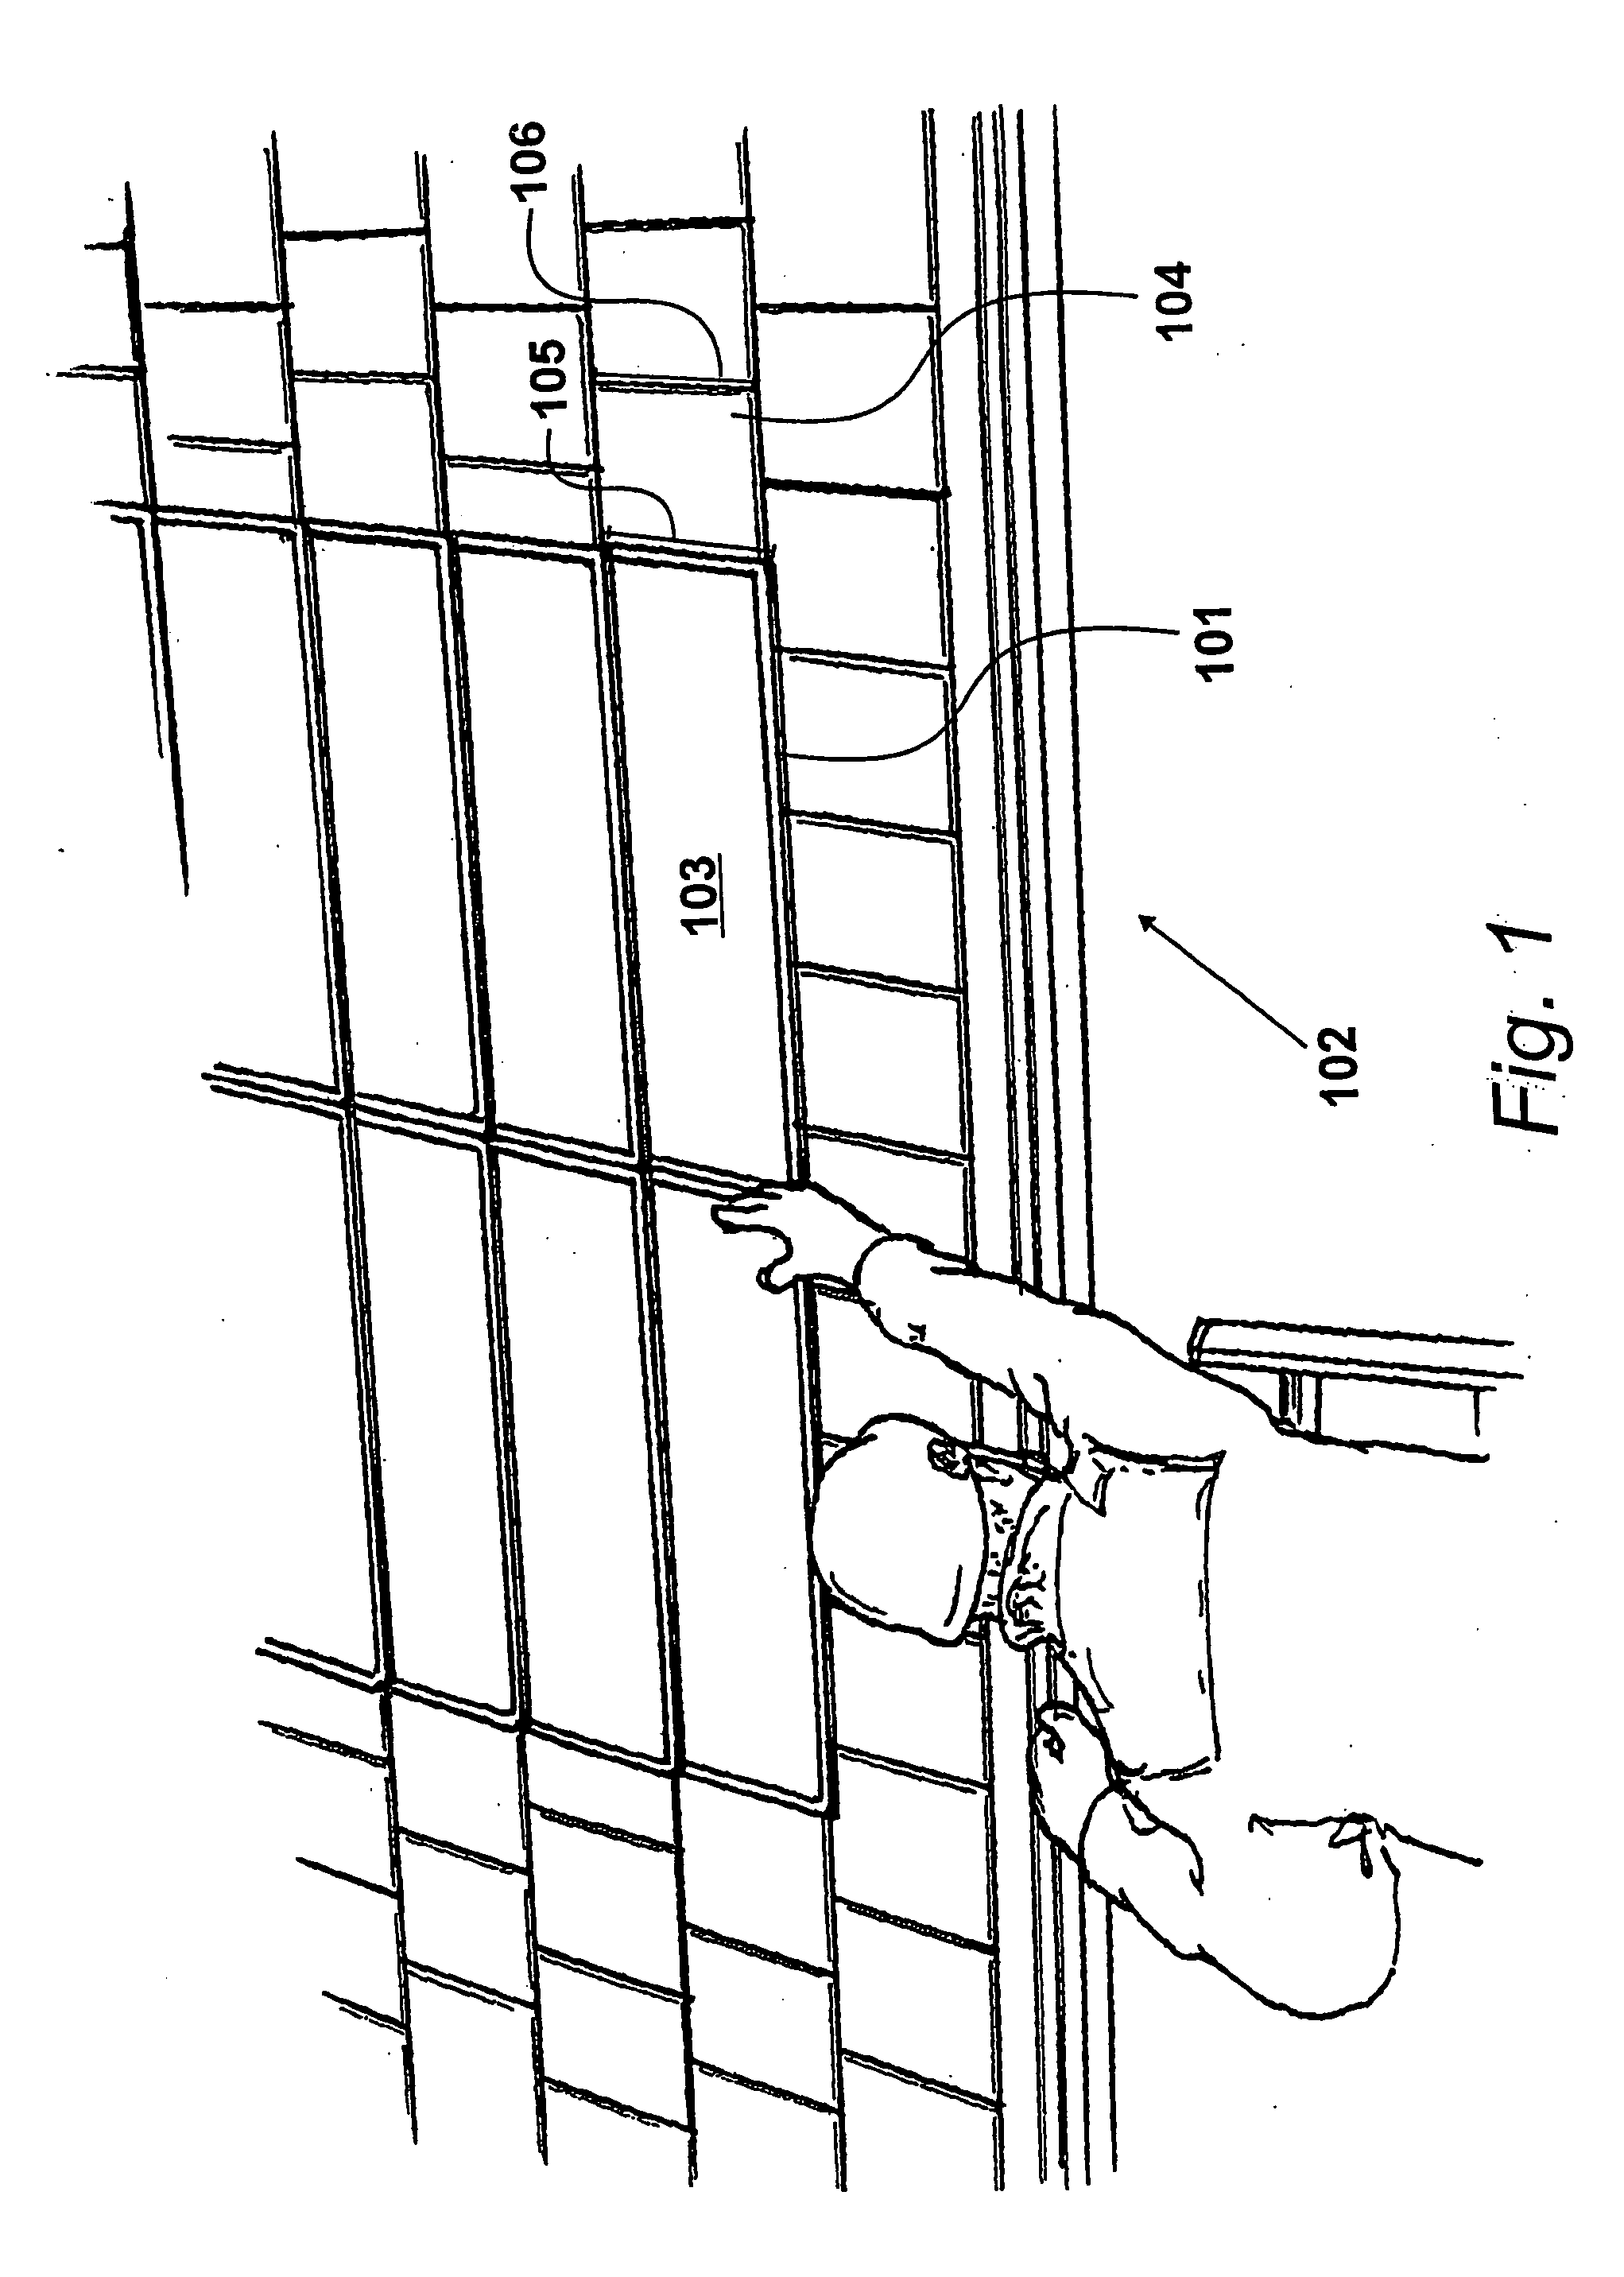 Support apparatus for supporting a solar energy collection device